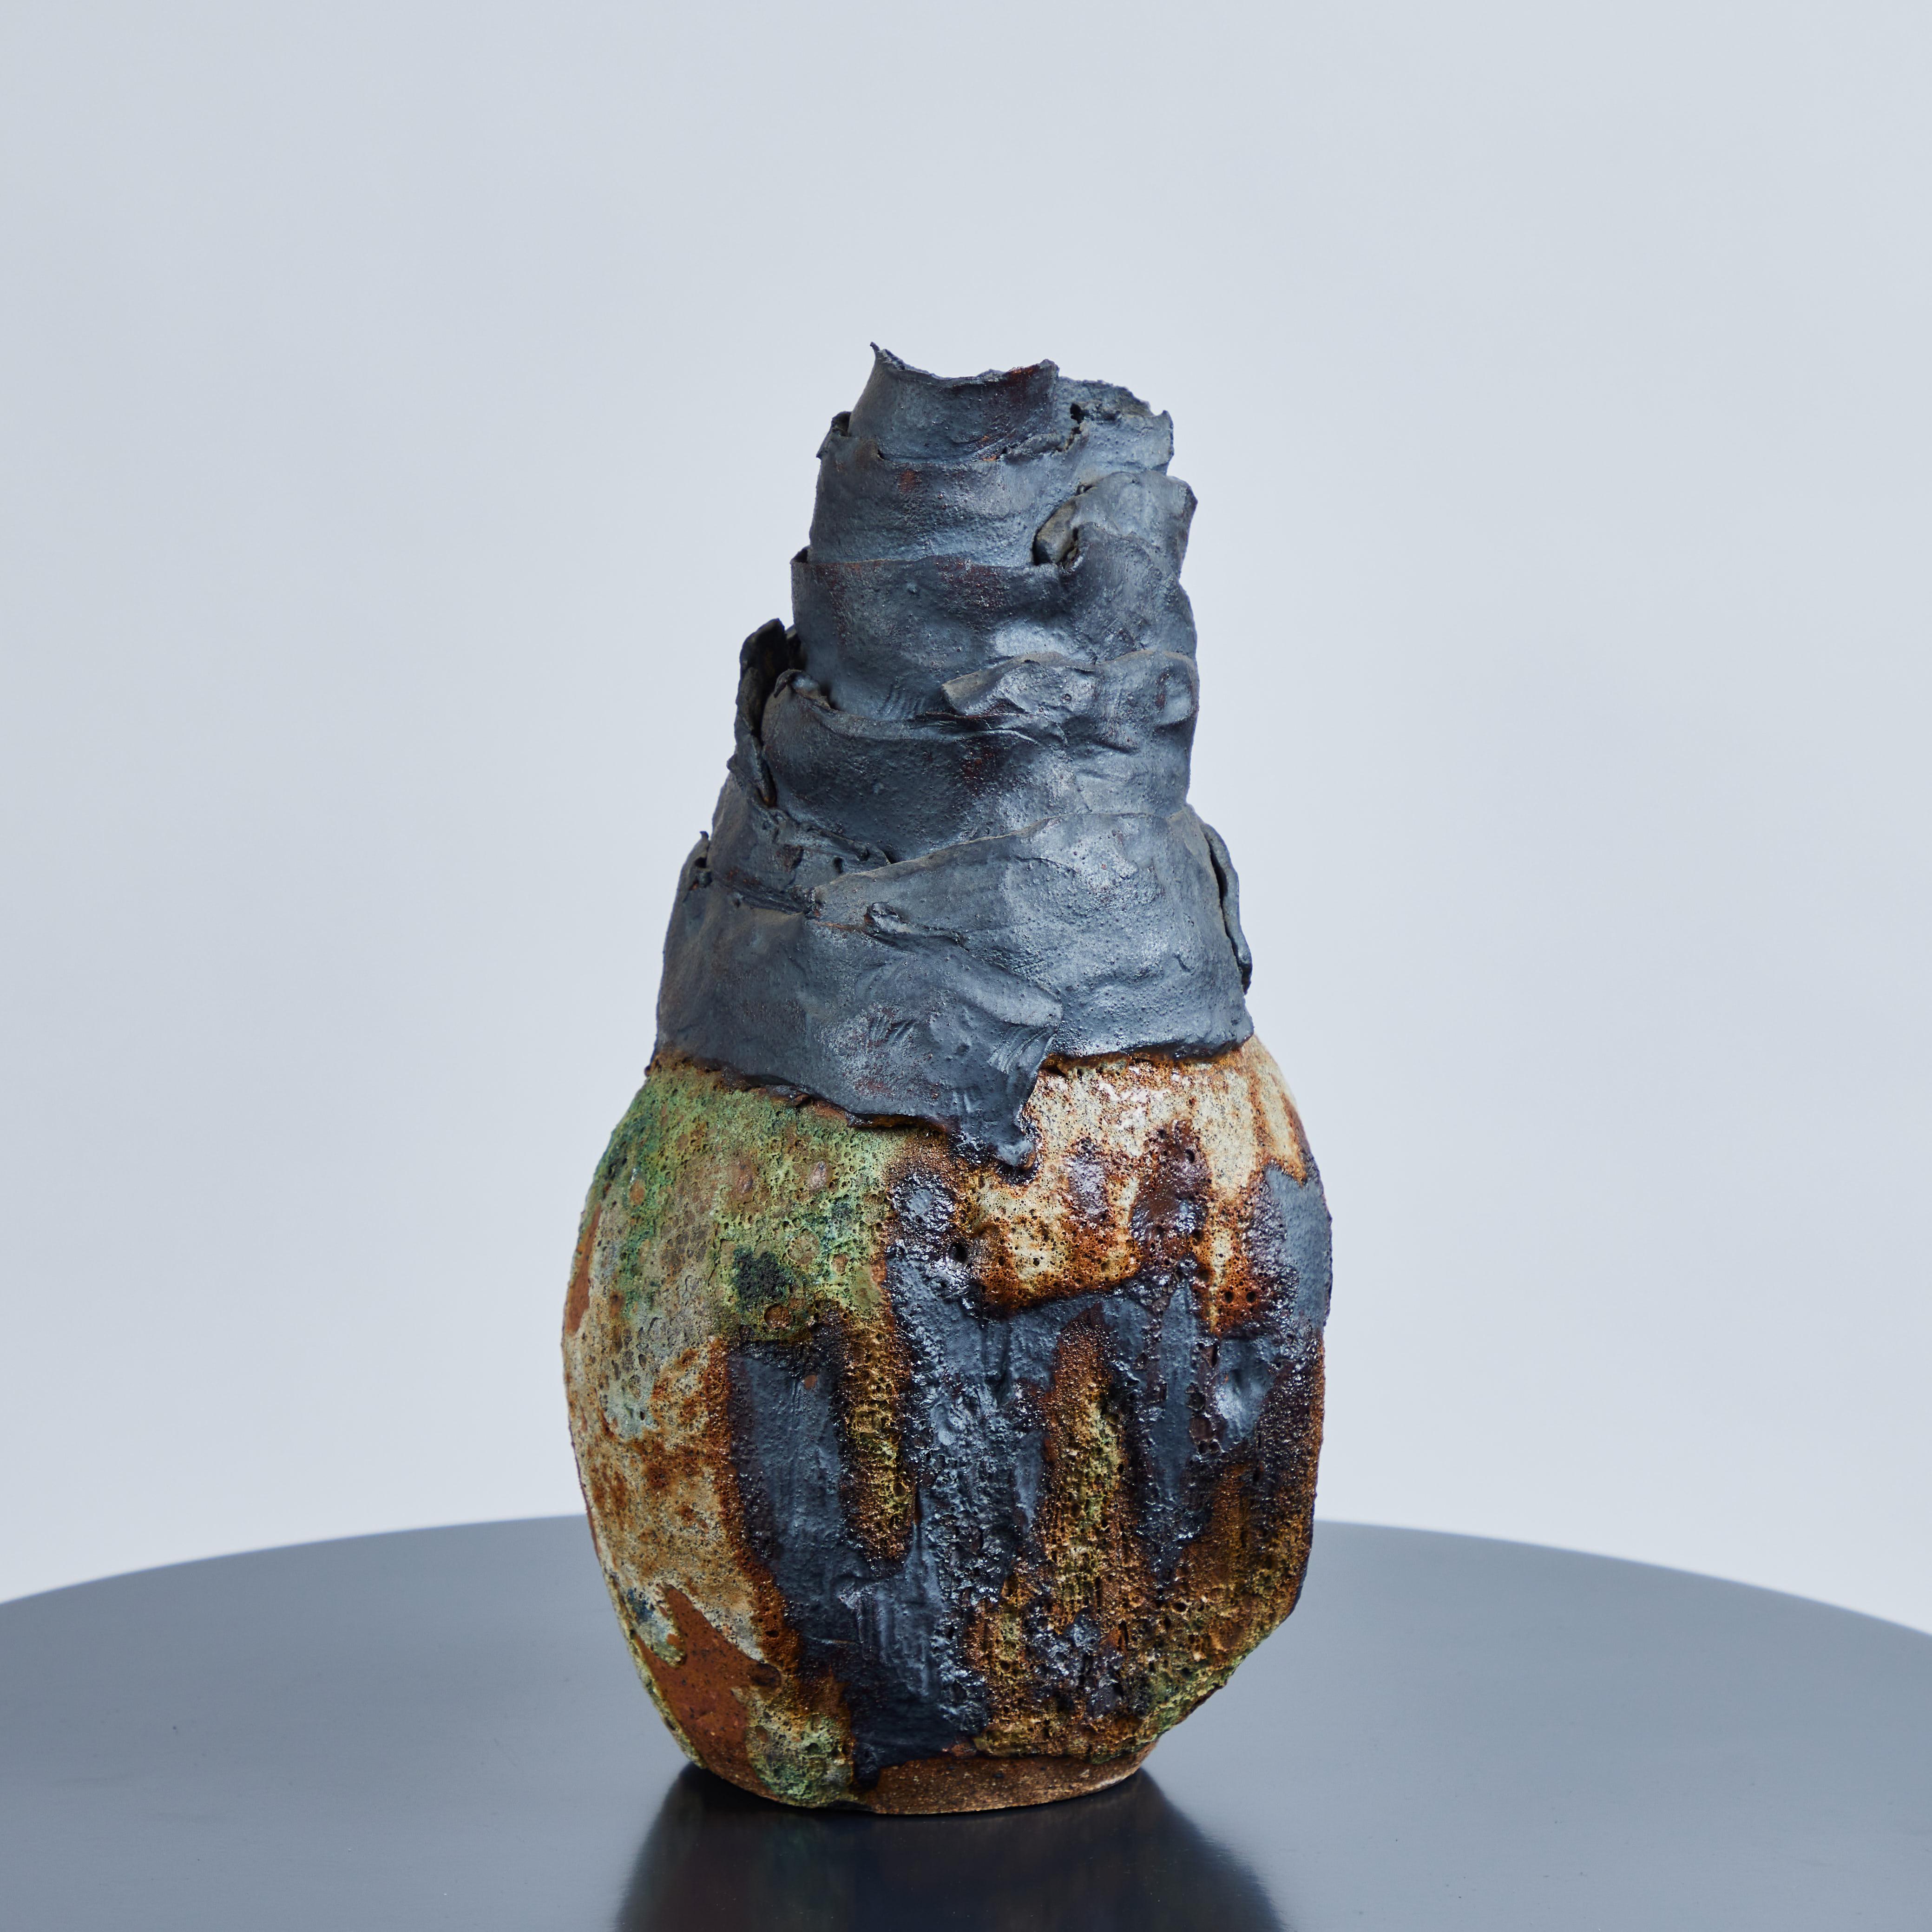 High fired ceramic vessel by Los Angeles artist Caroline Blackburn. This piece is one of her very earliest works, circa early to mid-2000's.